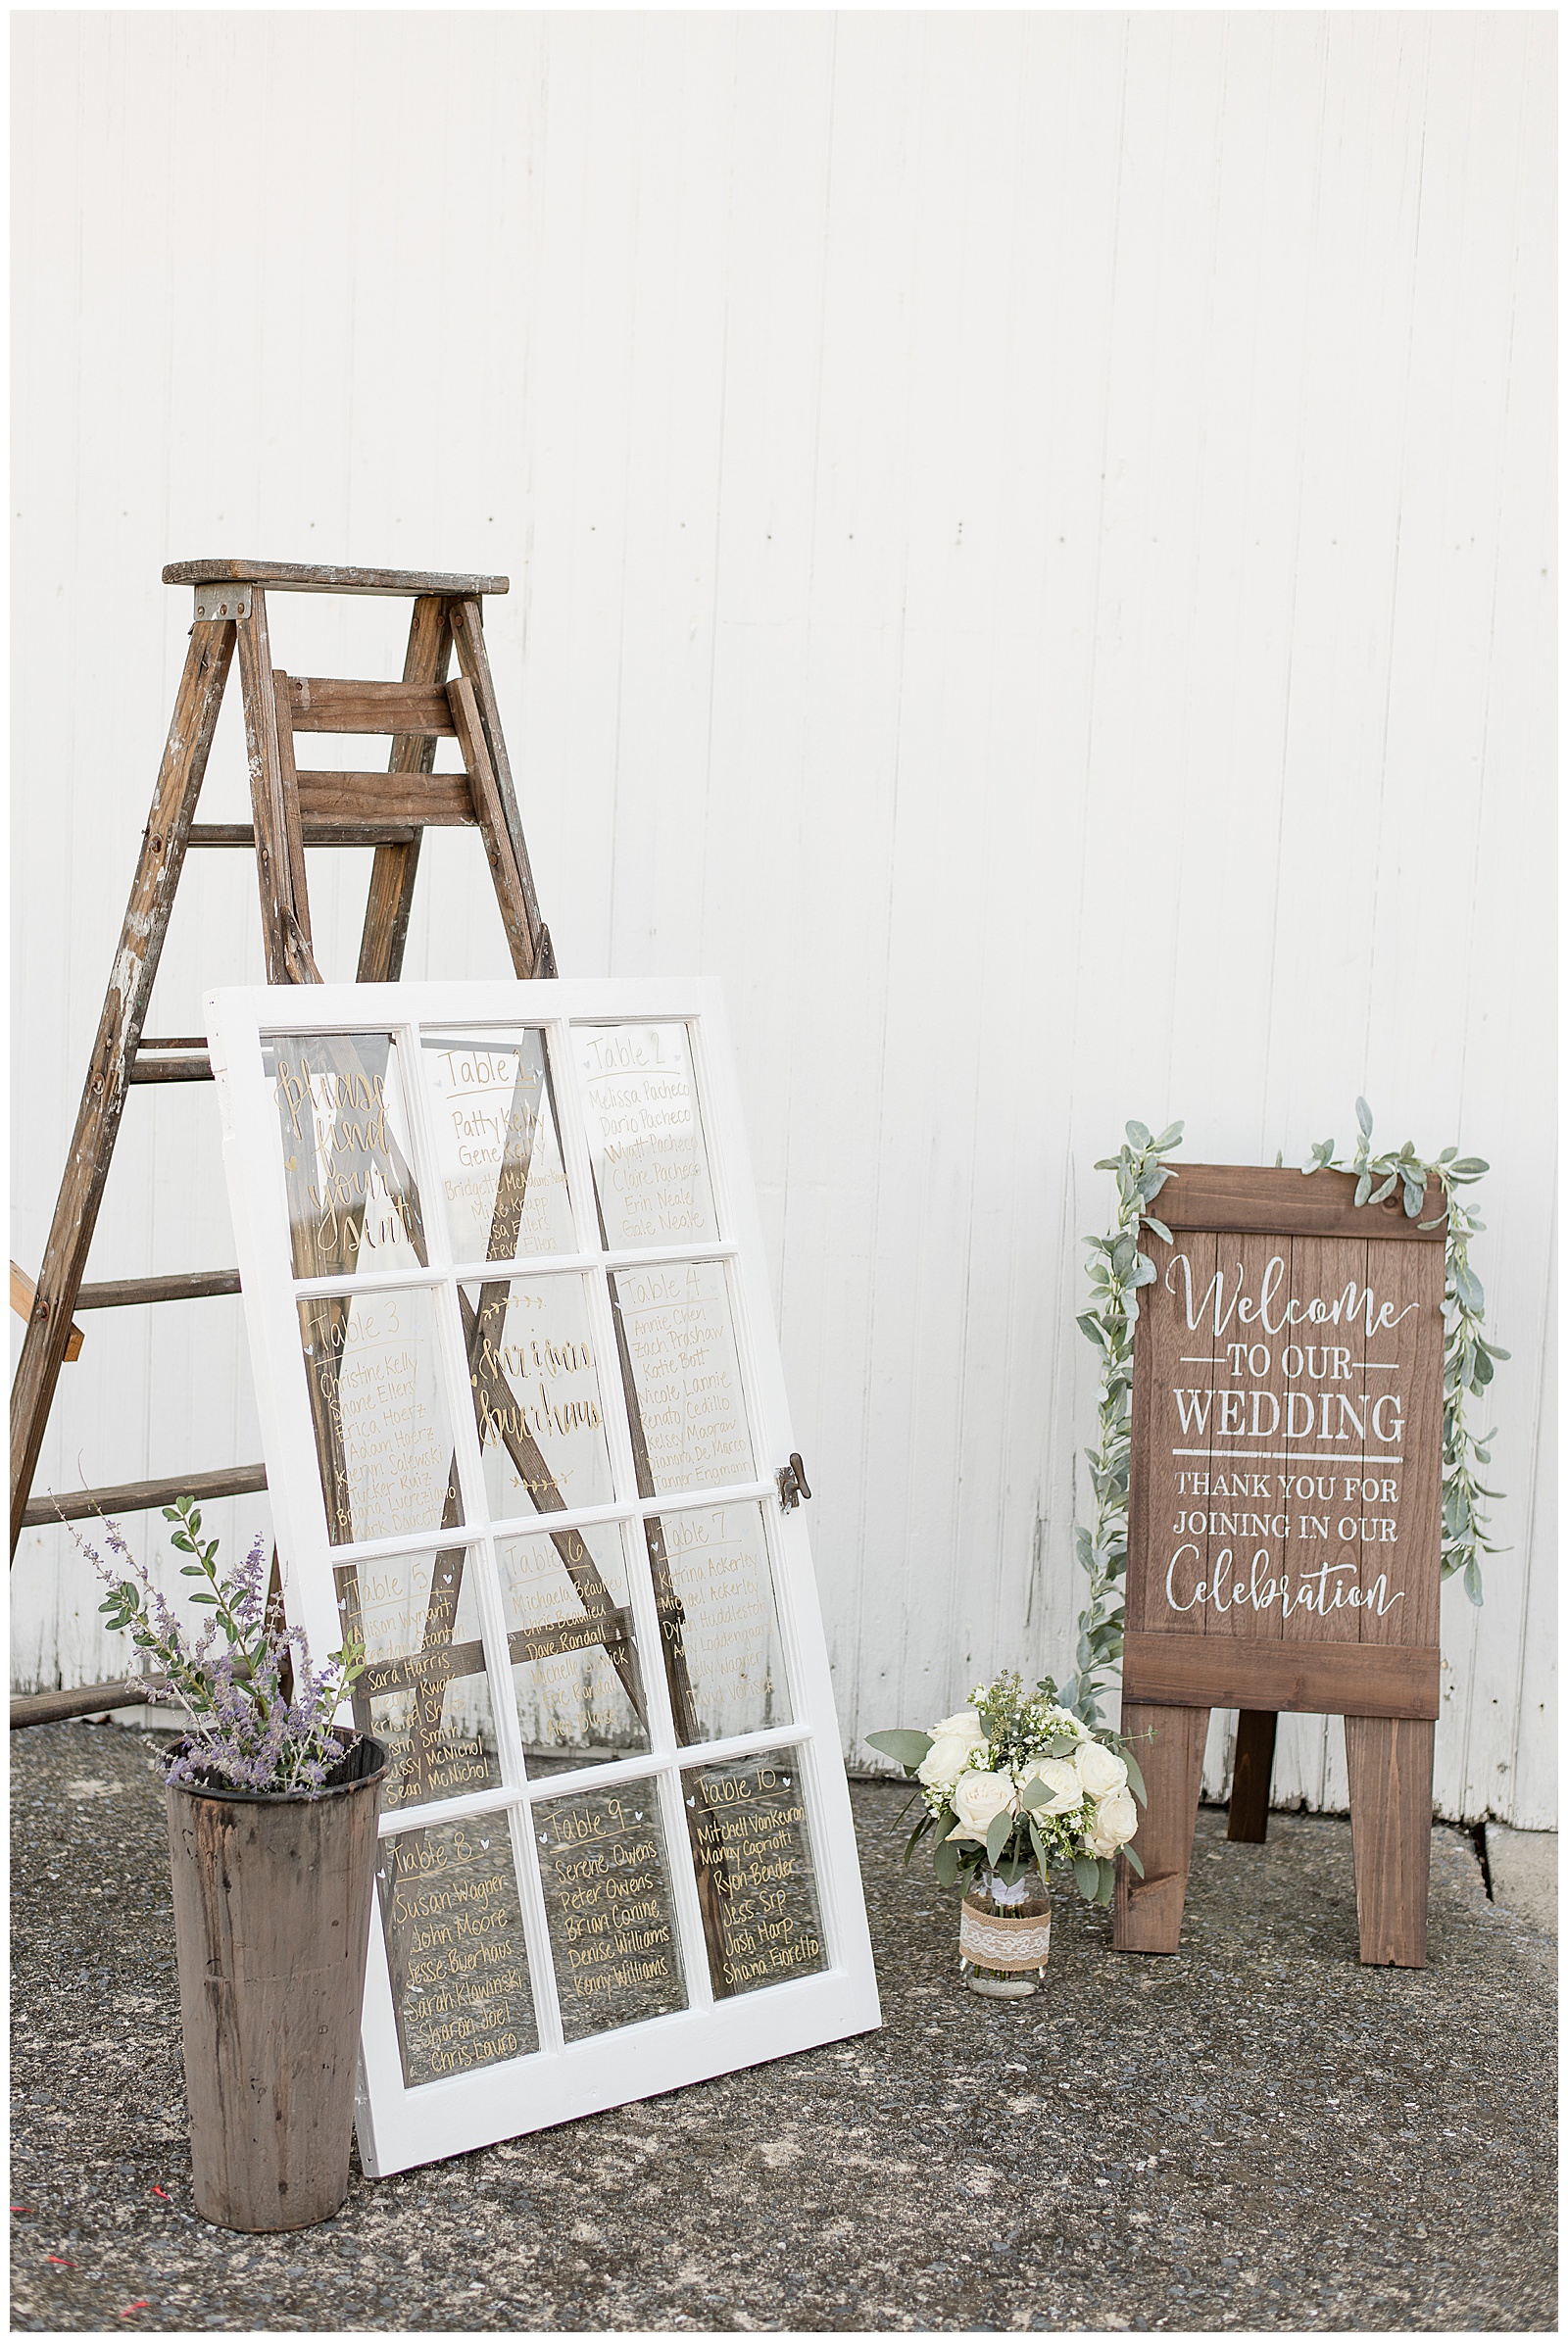 photo of their welcome display with white window frame guest list propped against brown wooden ladder with potted plants arranged around it and wooden welcome sign from wedding ceremony on right side in front of white barn at Lakefield Weddings in Manheim, PA